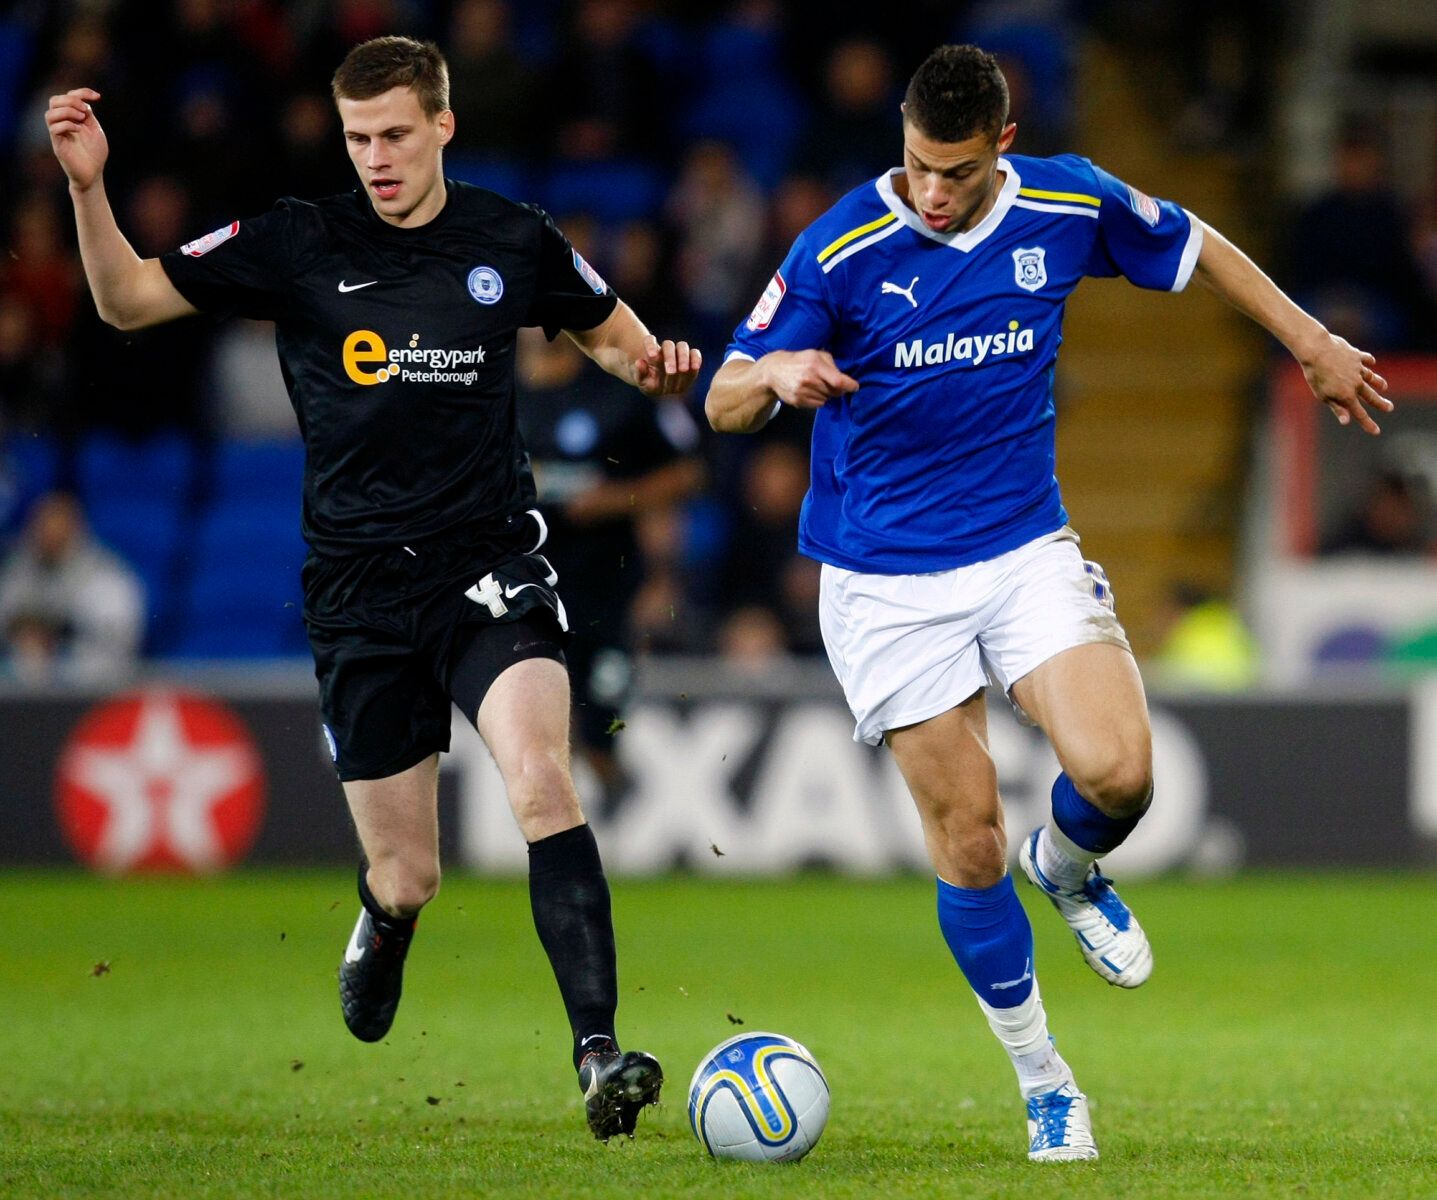 Football - Cardiff City v Peterborough United npower Football League Championship  - Cardiff City Stadium  - 14/2/12 
Peterborough United's Ryan Bennett (L) in action with Cardiff City's Rudy Gestede   
Mandatory Credit: Action Images / James Benwell 
Livepic 
EDITORIAL USE ONLY. No use with unauthorized audio, video, data, fixture lists, club/league logos or live services. Online in-match use limited to 45 images, no video emulation. No use in betting, games or single club/league/player publica